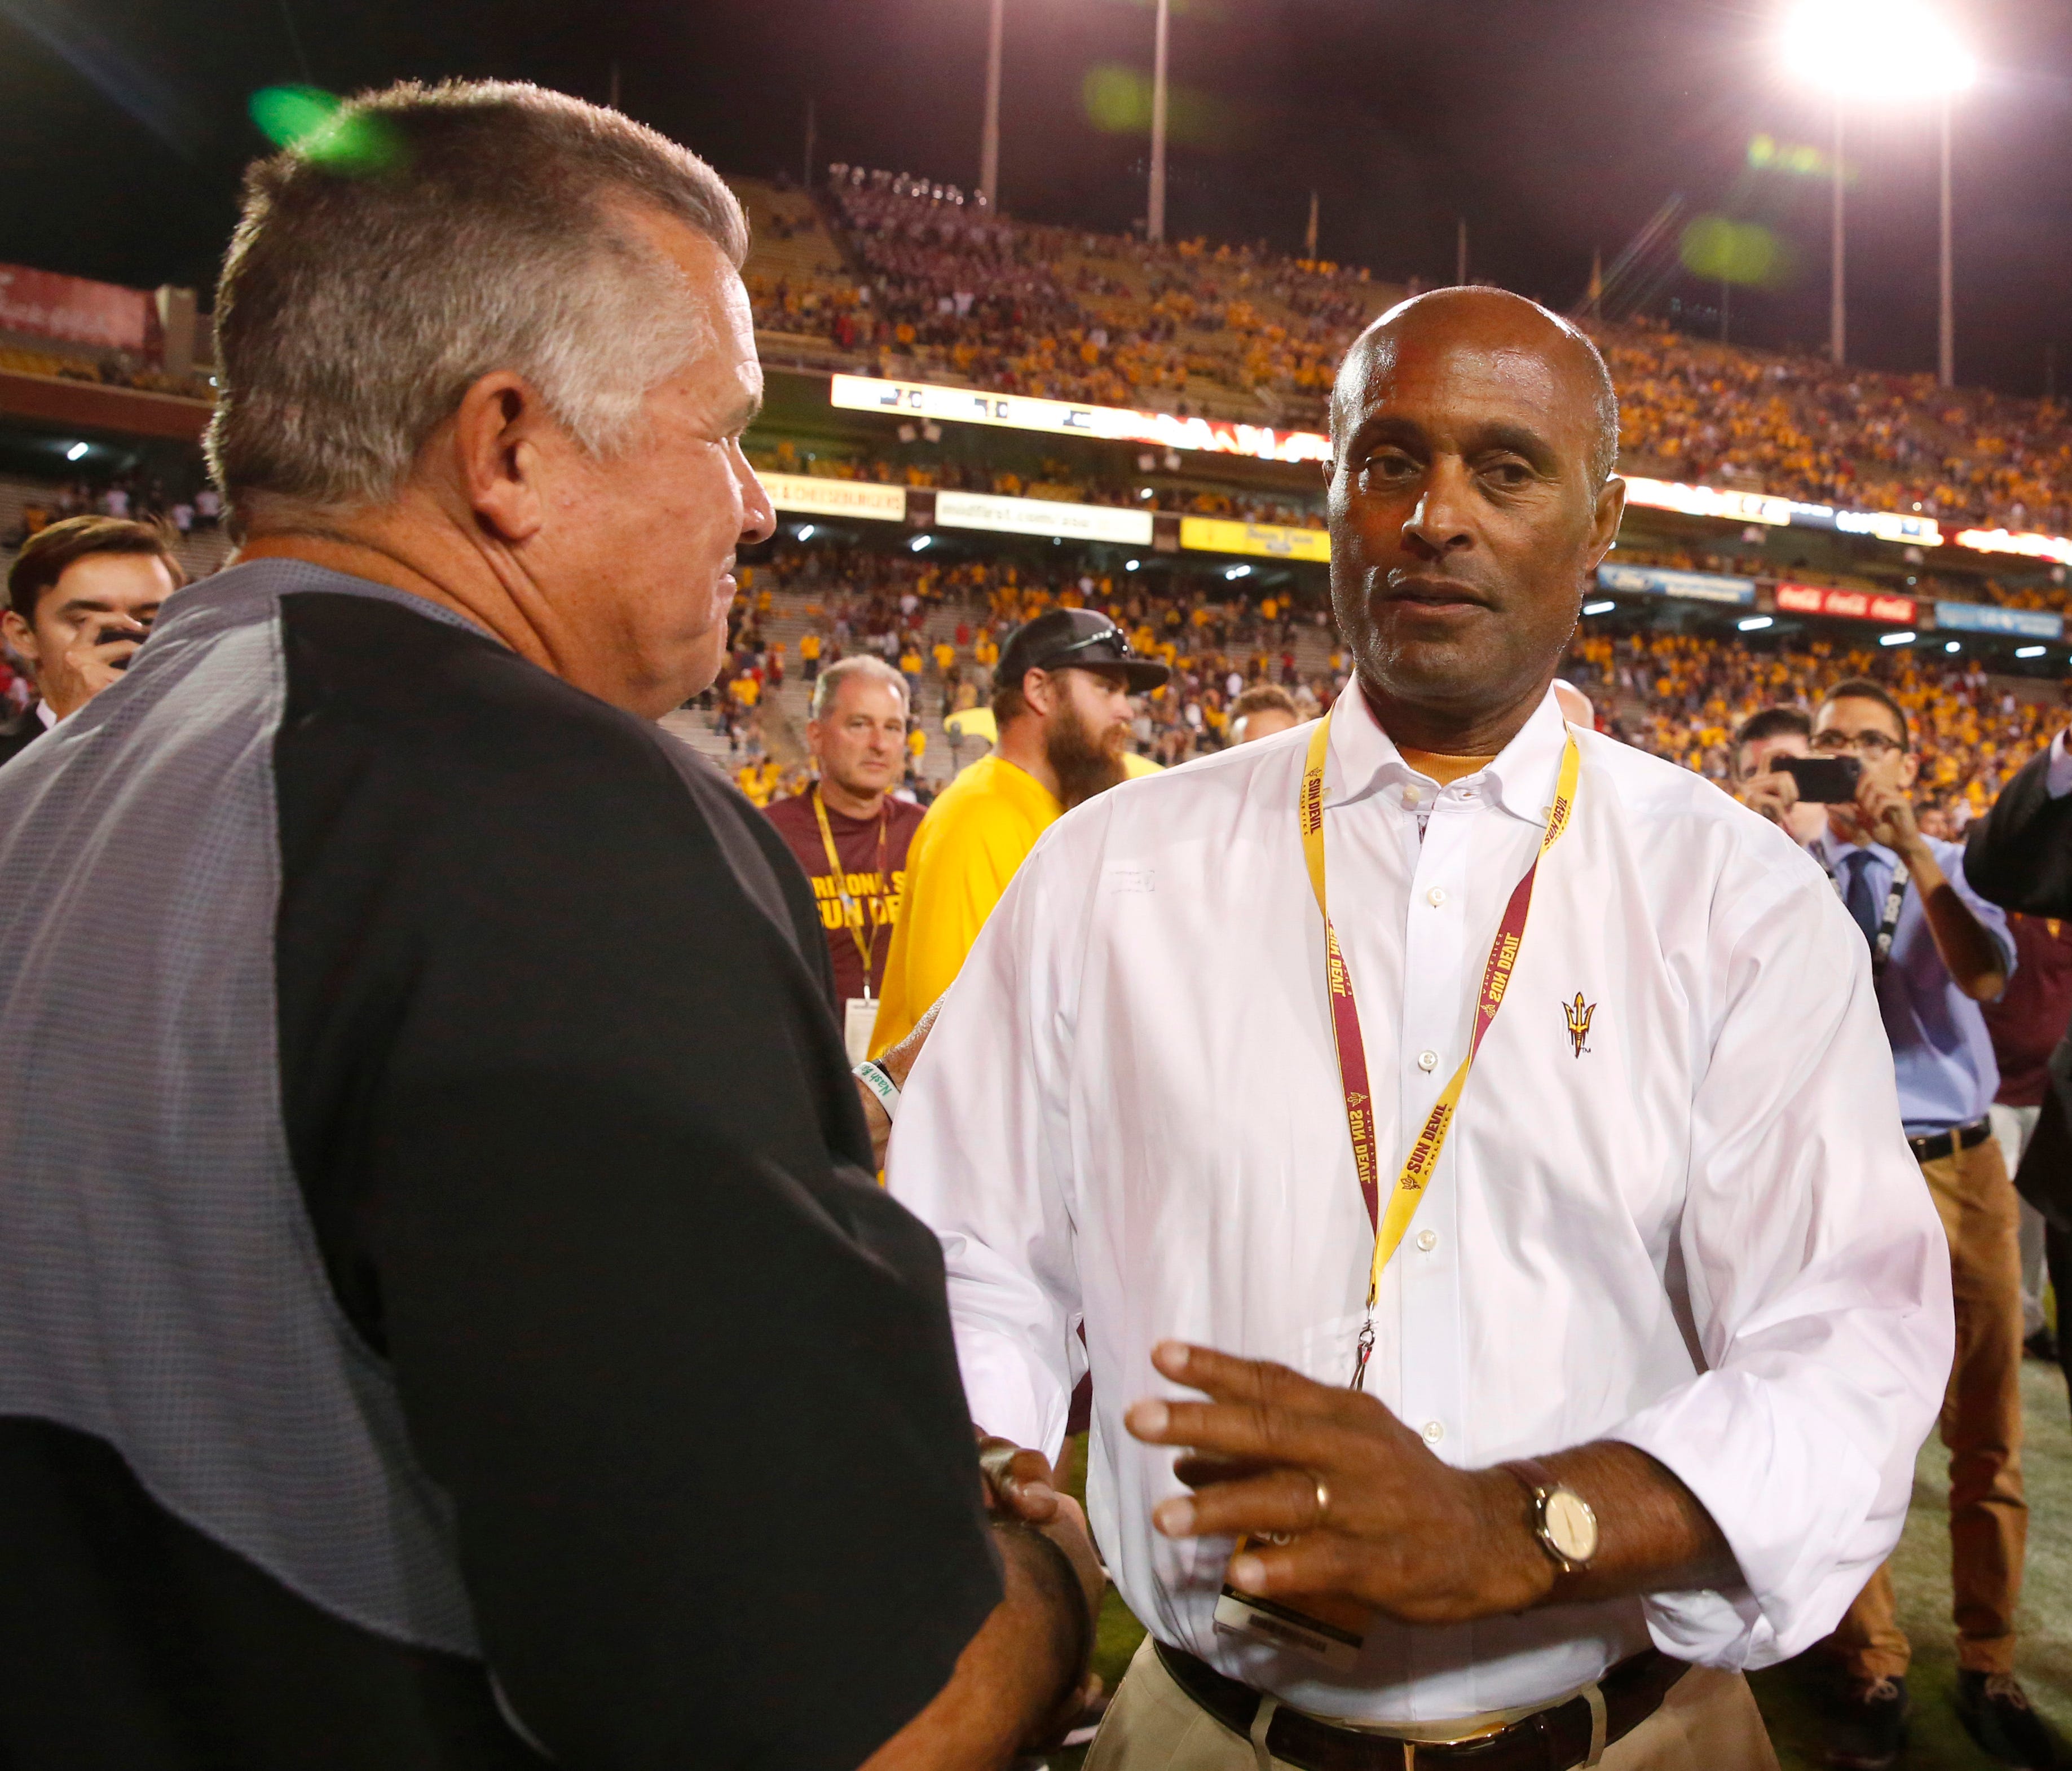 Arizona State head coach Todd Graham shake hands with Vice President for University Athletics and Athletics Director Ray Anderson after the Sun Devils won the 91st Territorial Cup game against the Arizona Wildcats at Sun Devil Stadium in Tempe on Nov